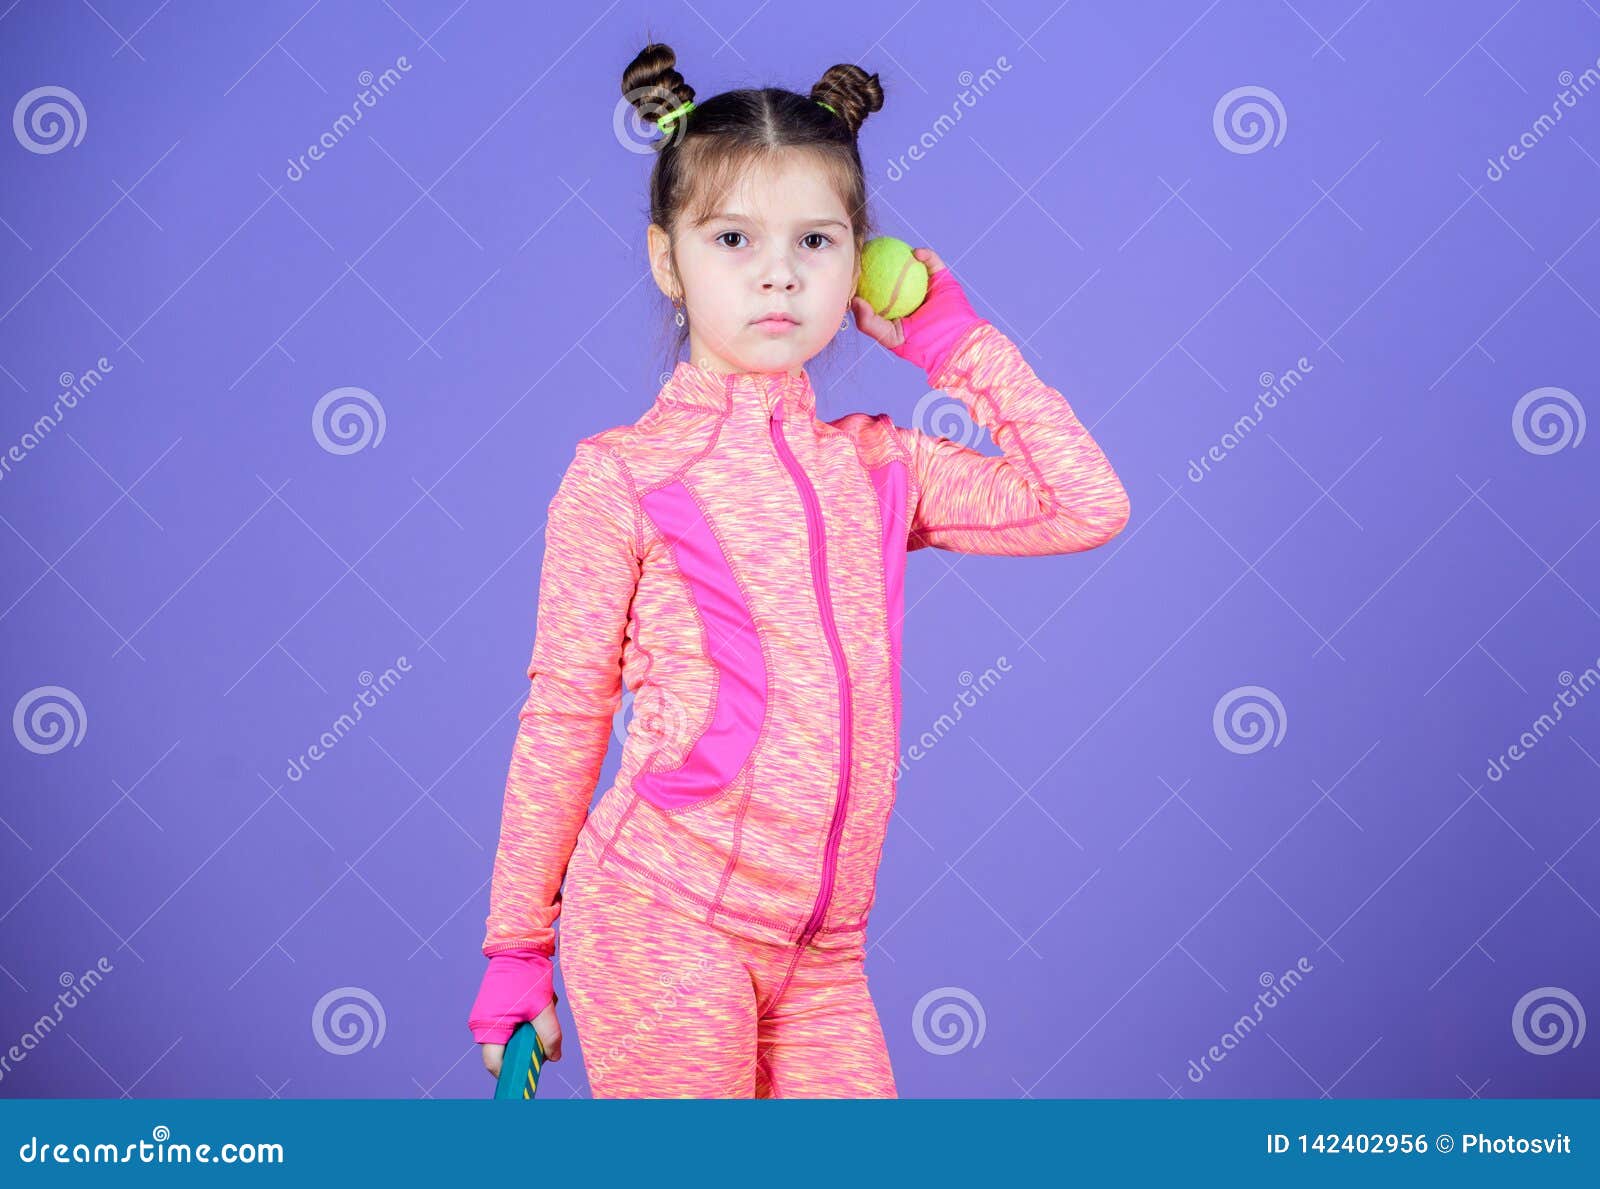 Girl Cute Child Double Bun Hairstyle Tennis Player. Active Games. Sport  Upbringing. Small Cutie Likes Tennis Stock Photo - Image of athlete, games:  142402956